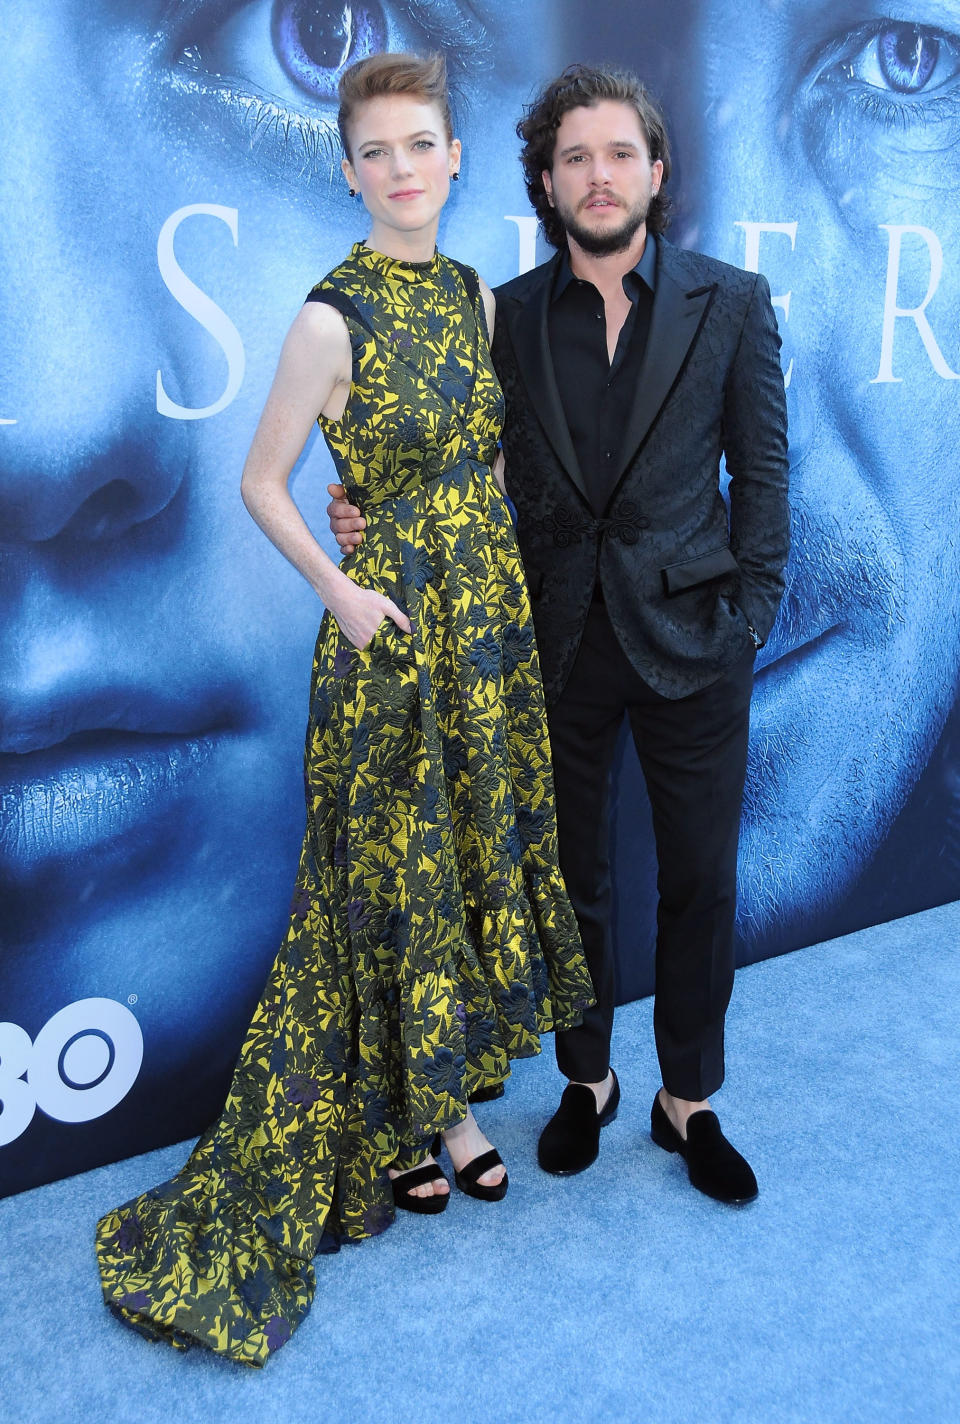 Kit Harington and Rose Leslie at Walt Disney Concert Hall in L.A.on July 12. (Photo: Getty Images)